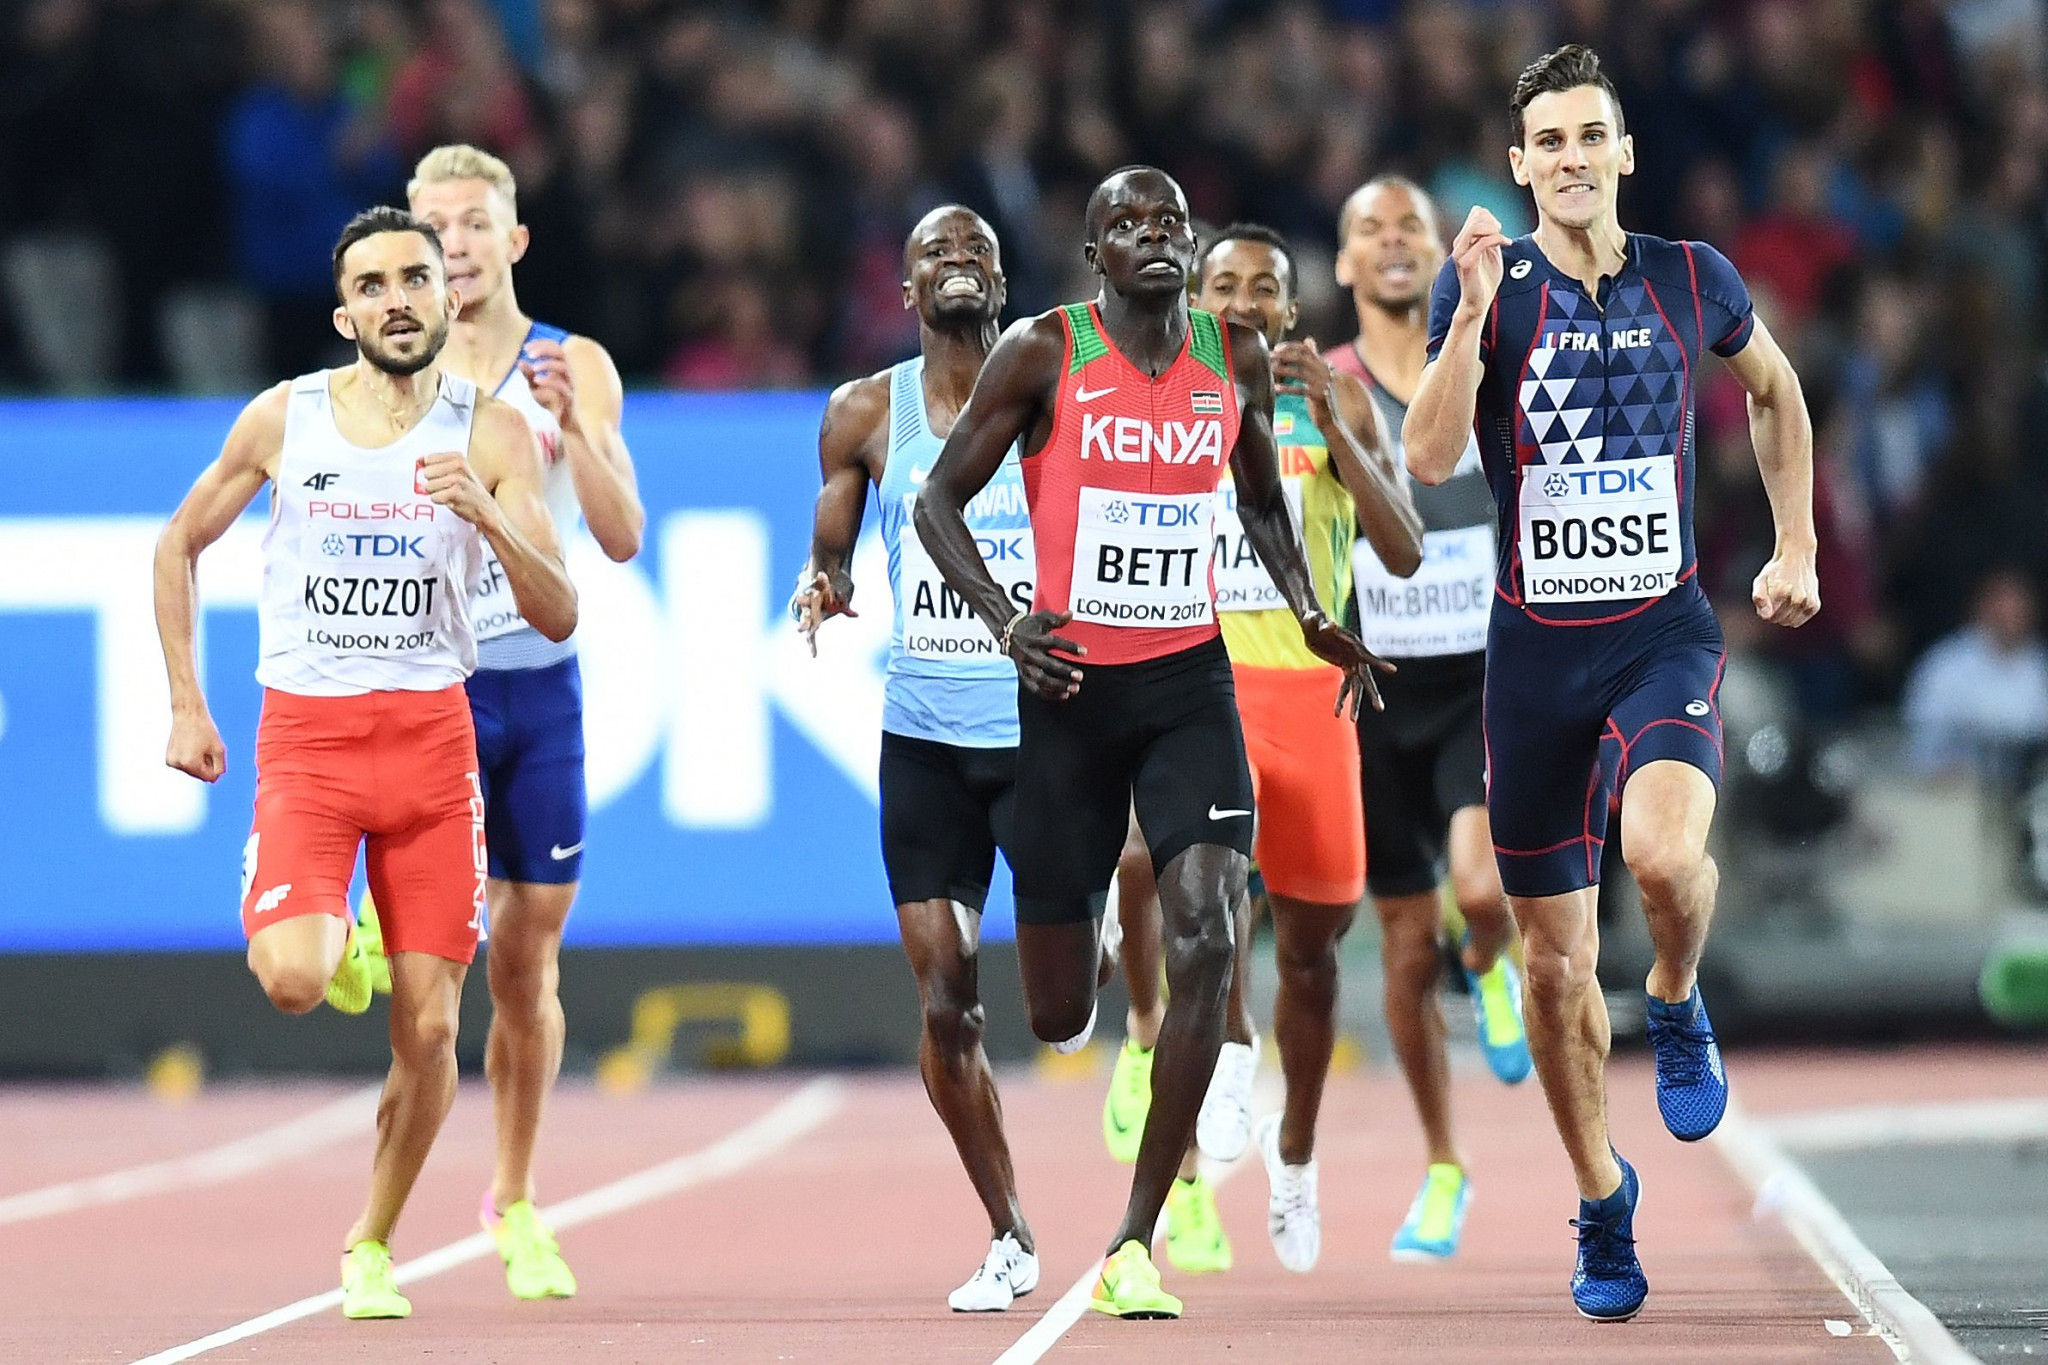 Kipyegon Bett was third in the 800m at the 2017 World Championships in London ©Getty Images